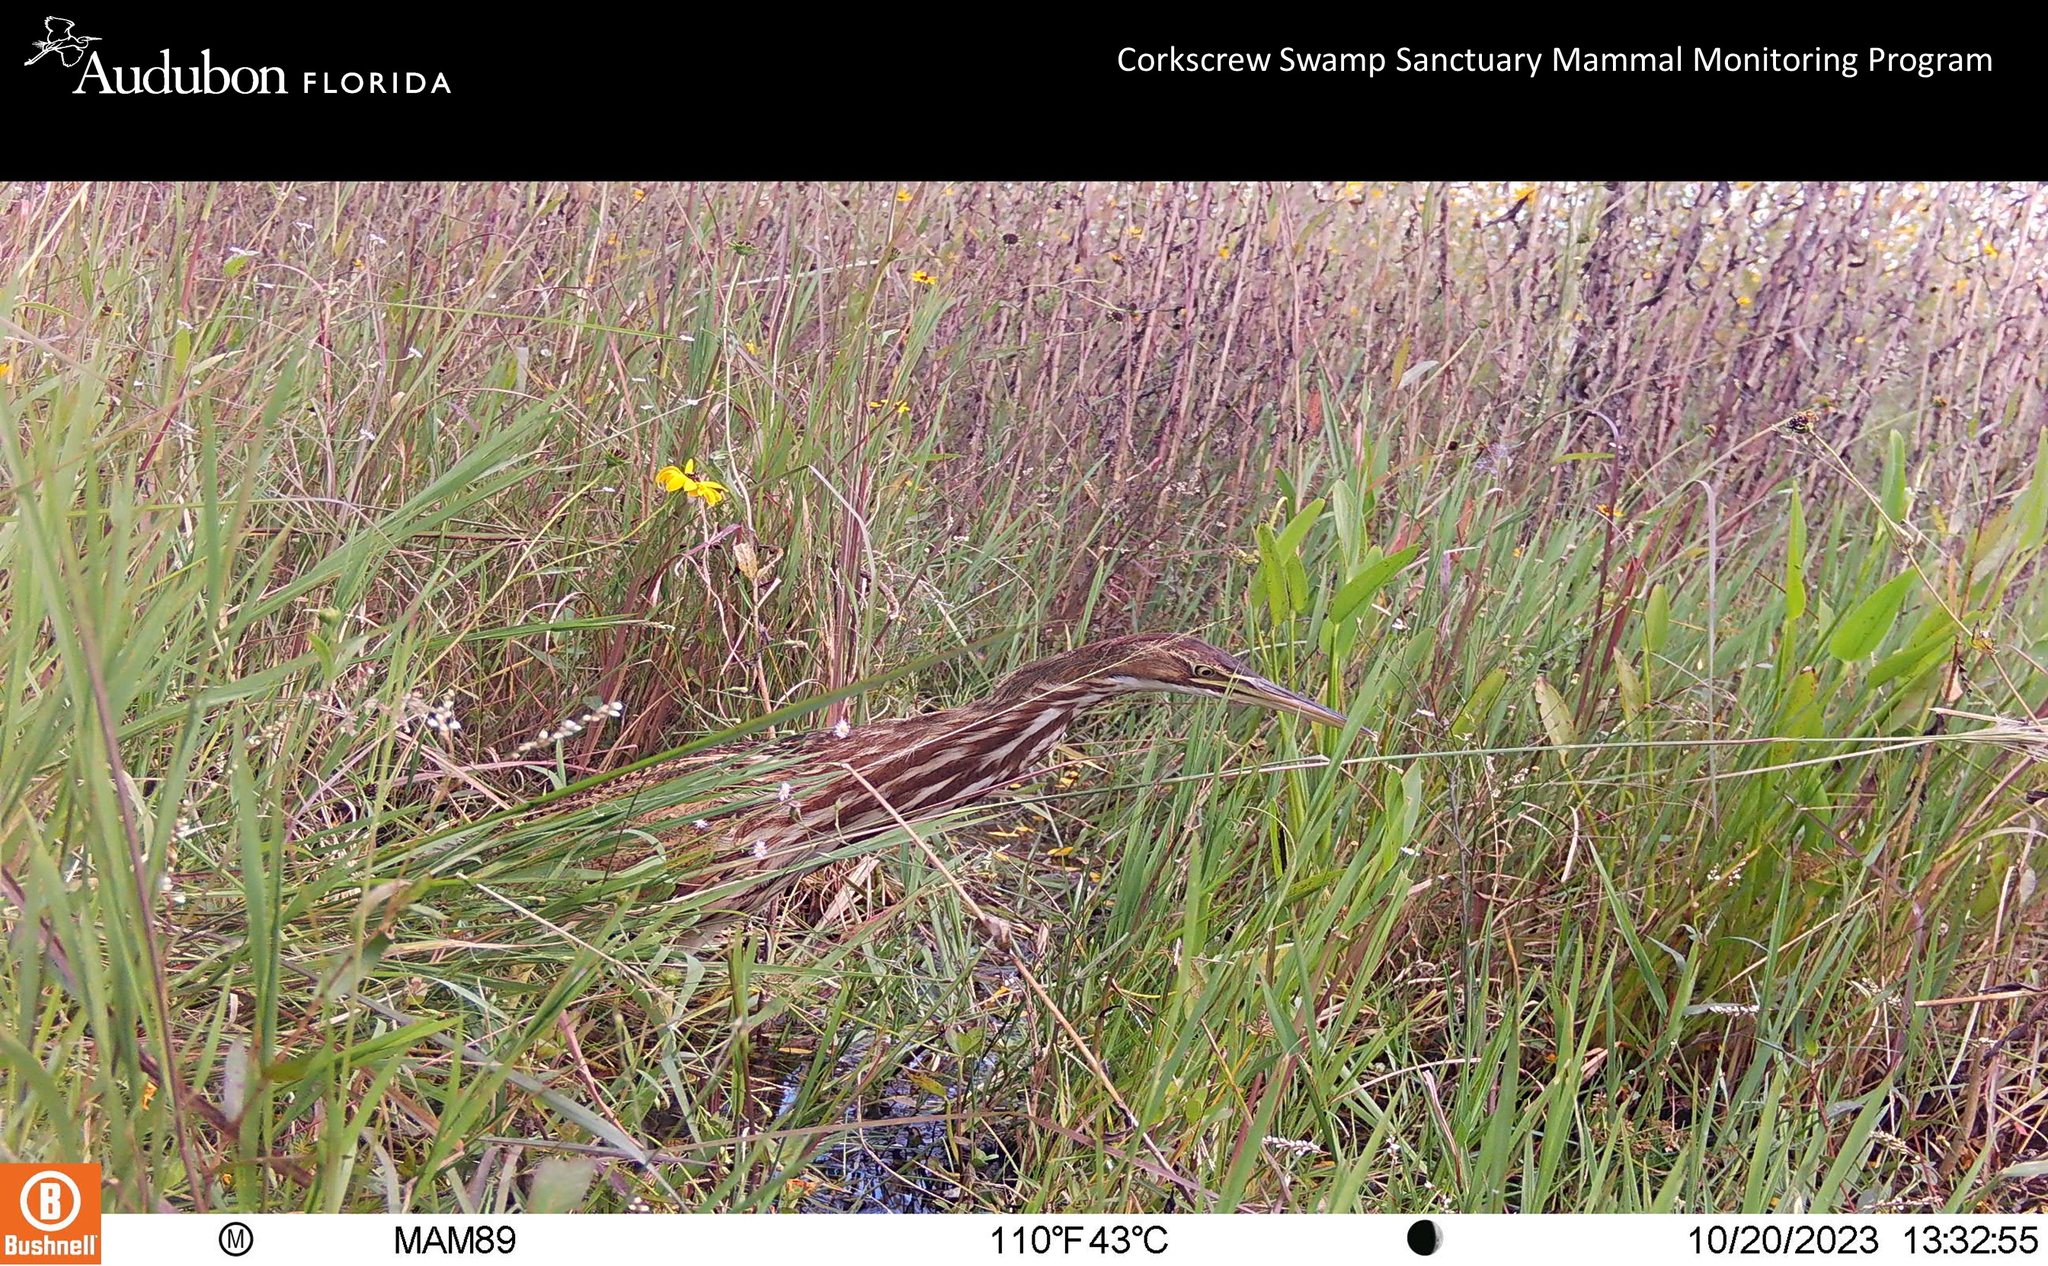 A trail camera image of an American Bittern at Corkscrew Swamp Sanctuary